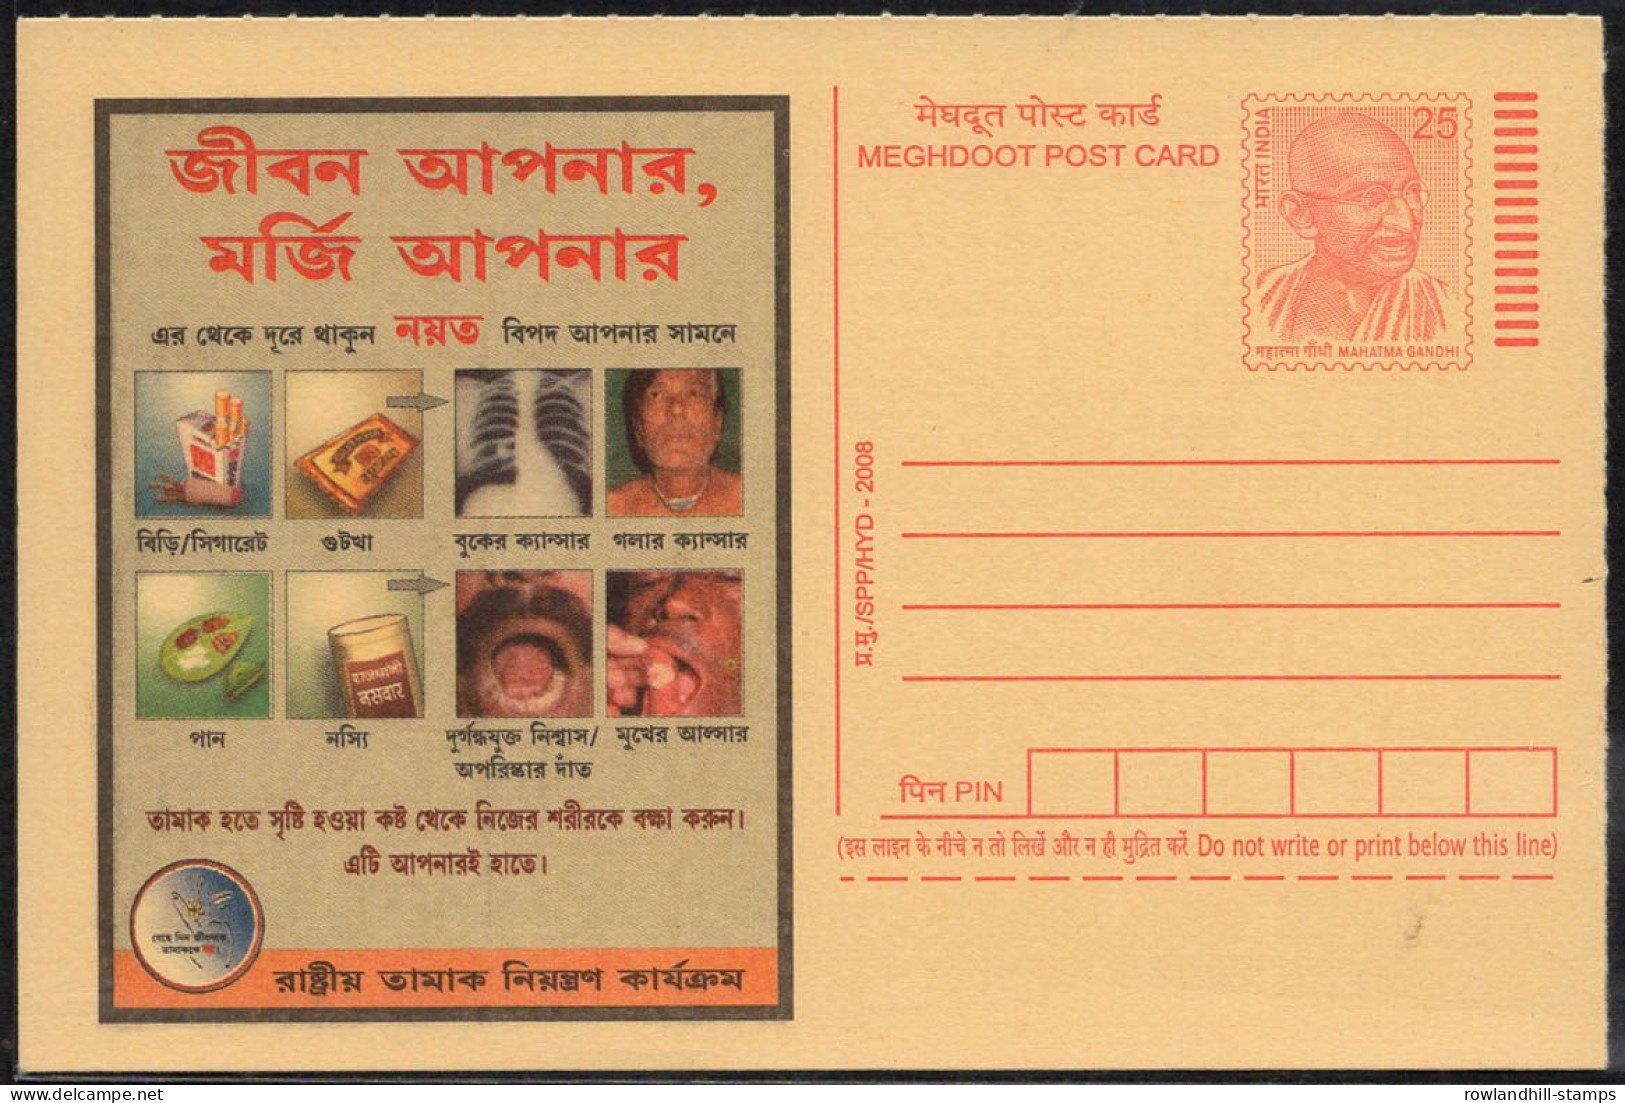 INDIA, 2008, Stop SMOKING, Tobacco, Meghdoot POST CARD, Unused, Stationery, Cigarette, Cancer, Disease Drugs, X-ray, A23 - Drugs